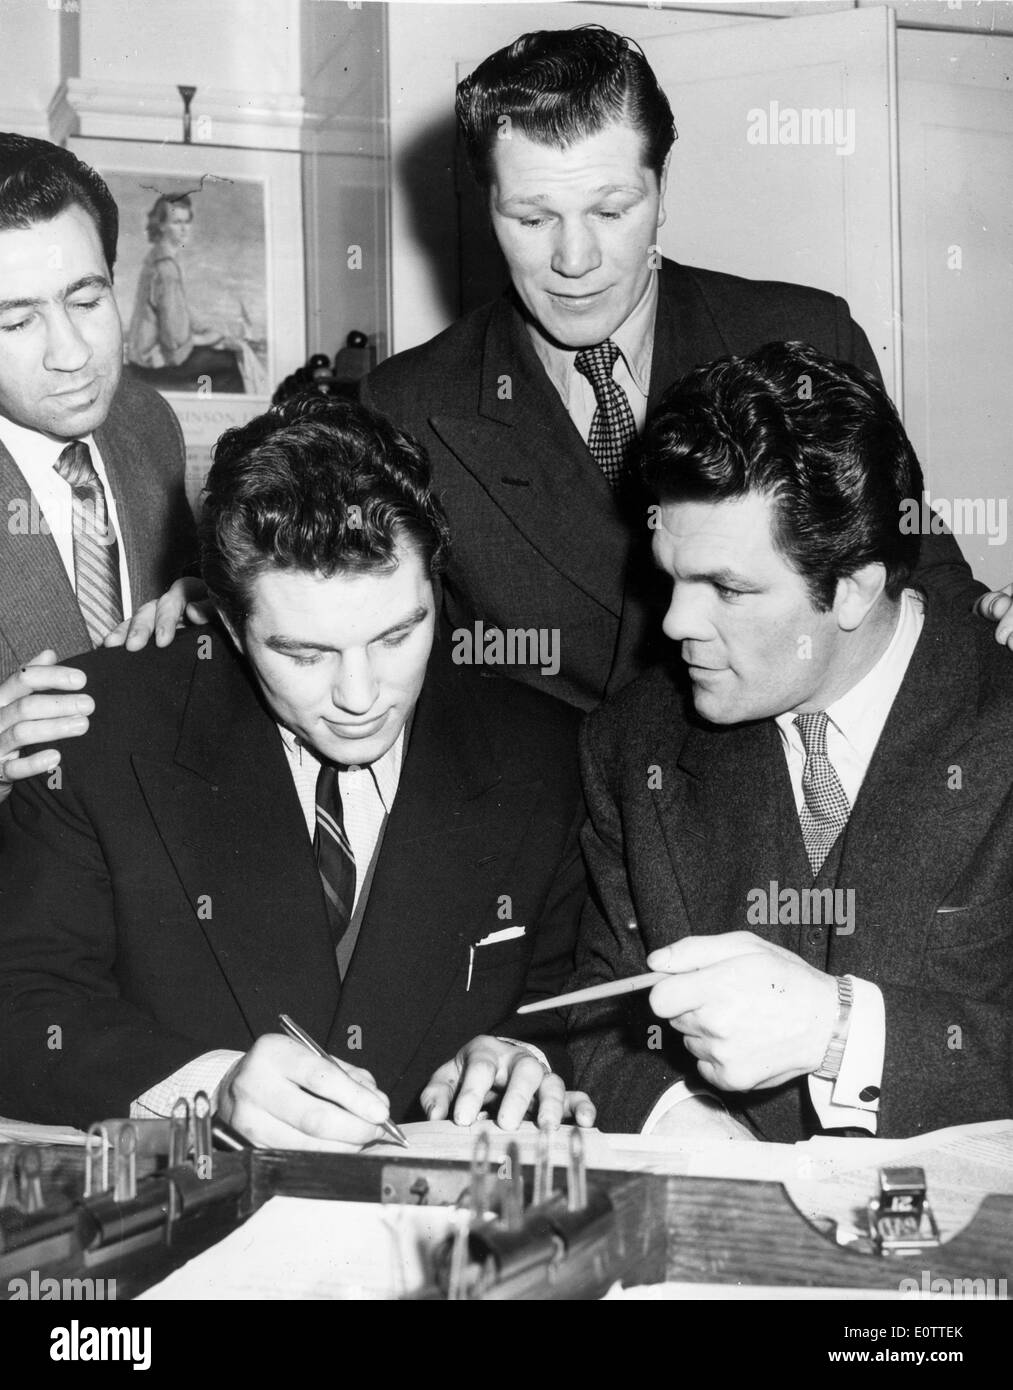 Boxer Albert Finch watches Arthur Howard sign-up for match Stock Photo